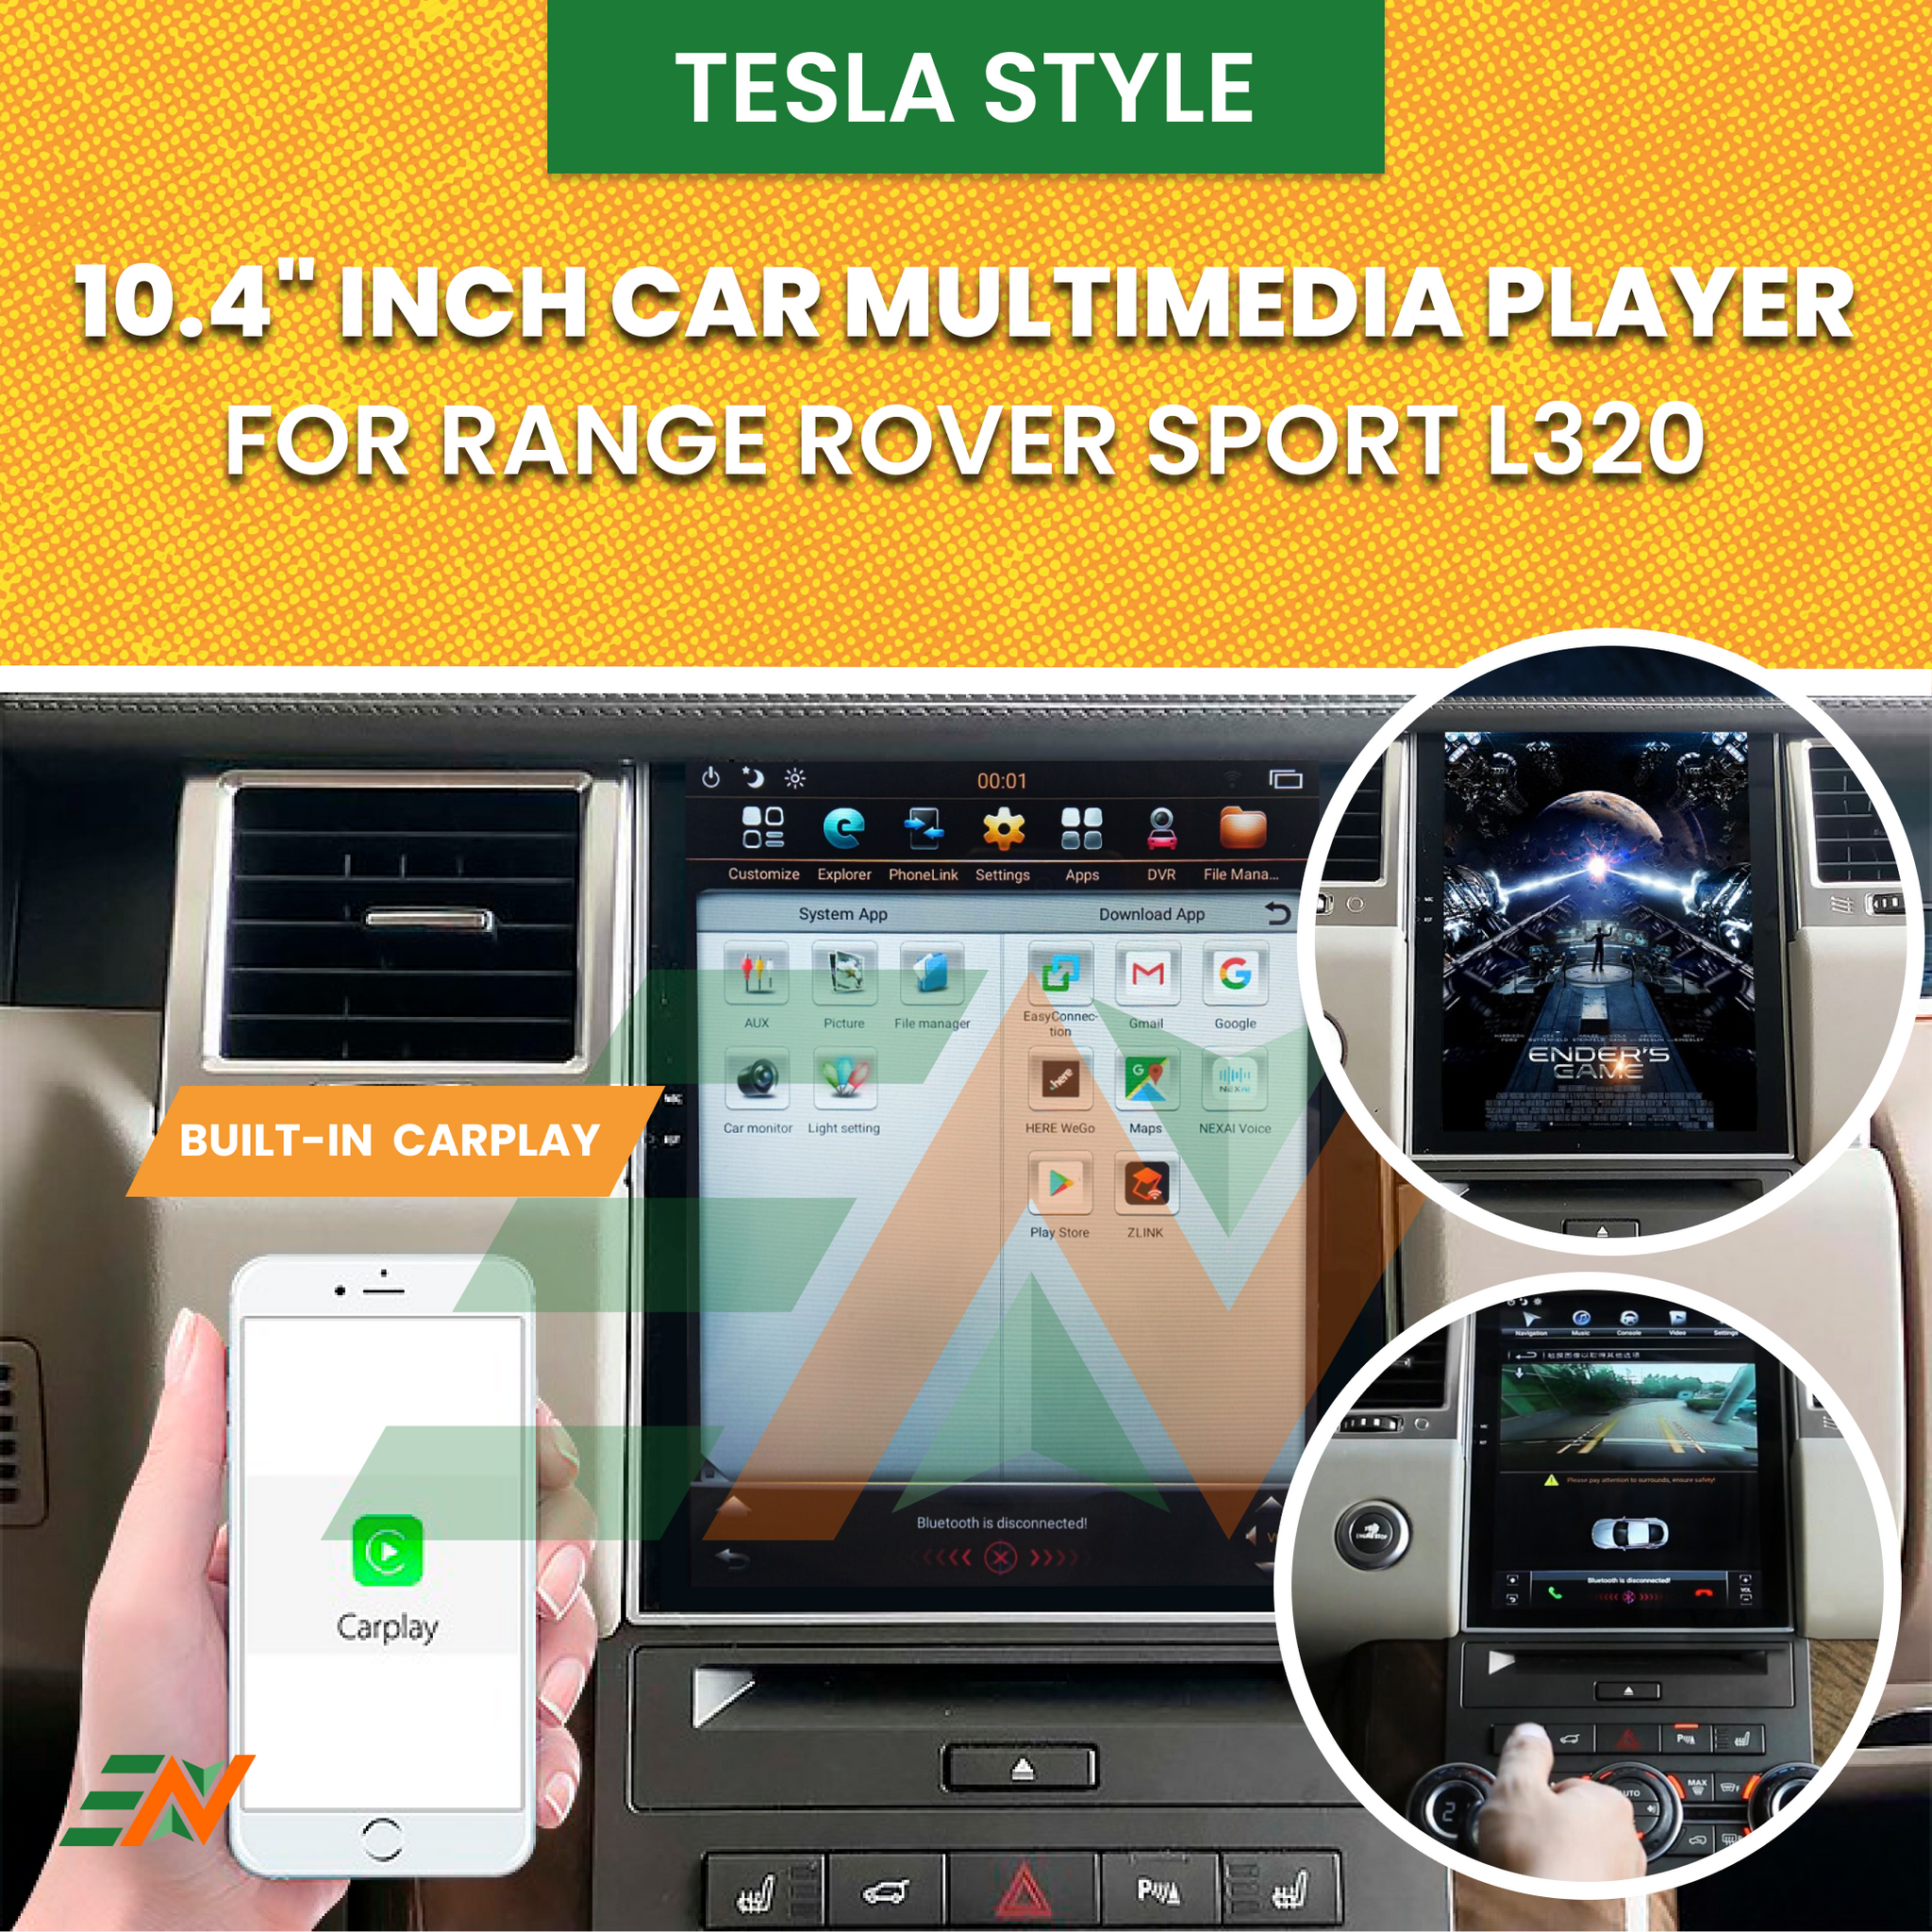 10.4 inch tesla style car multimedia player for Range Rover Sport L320